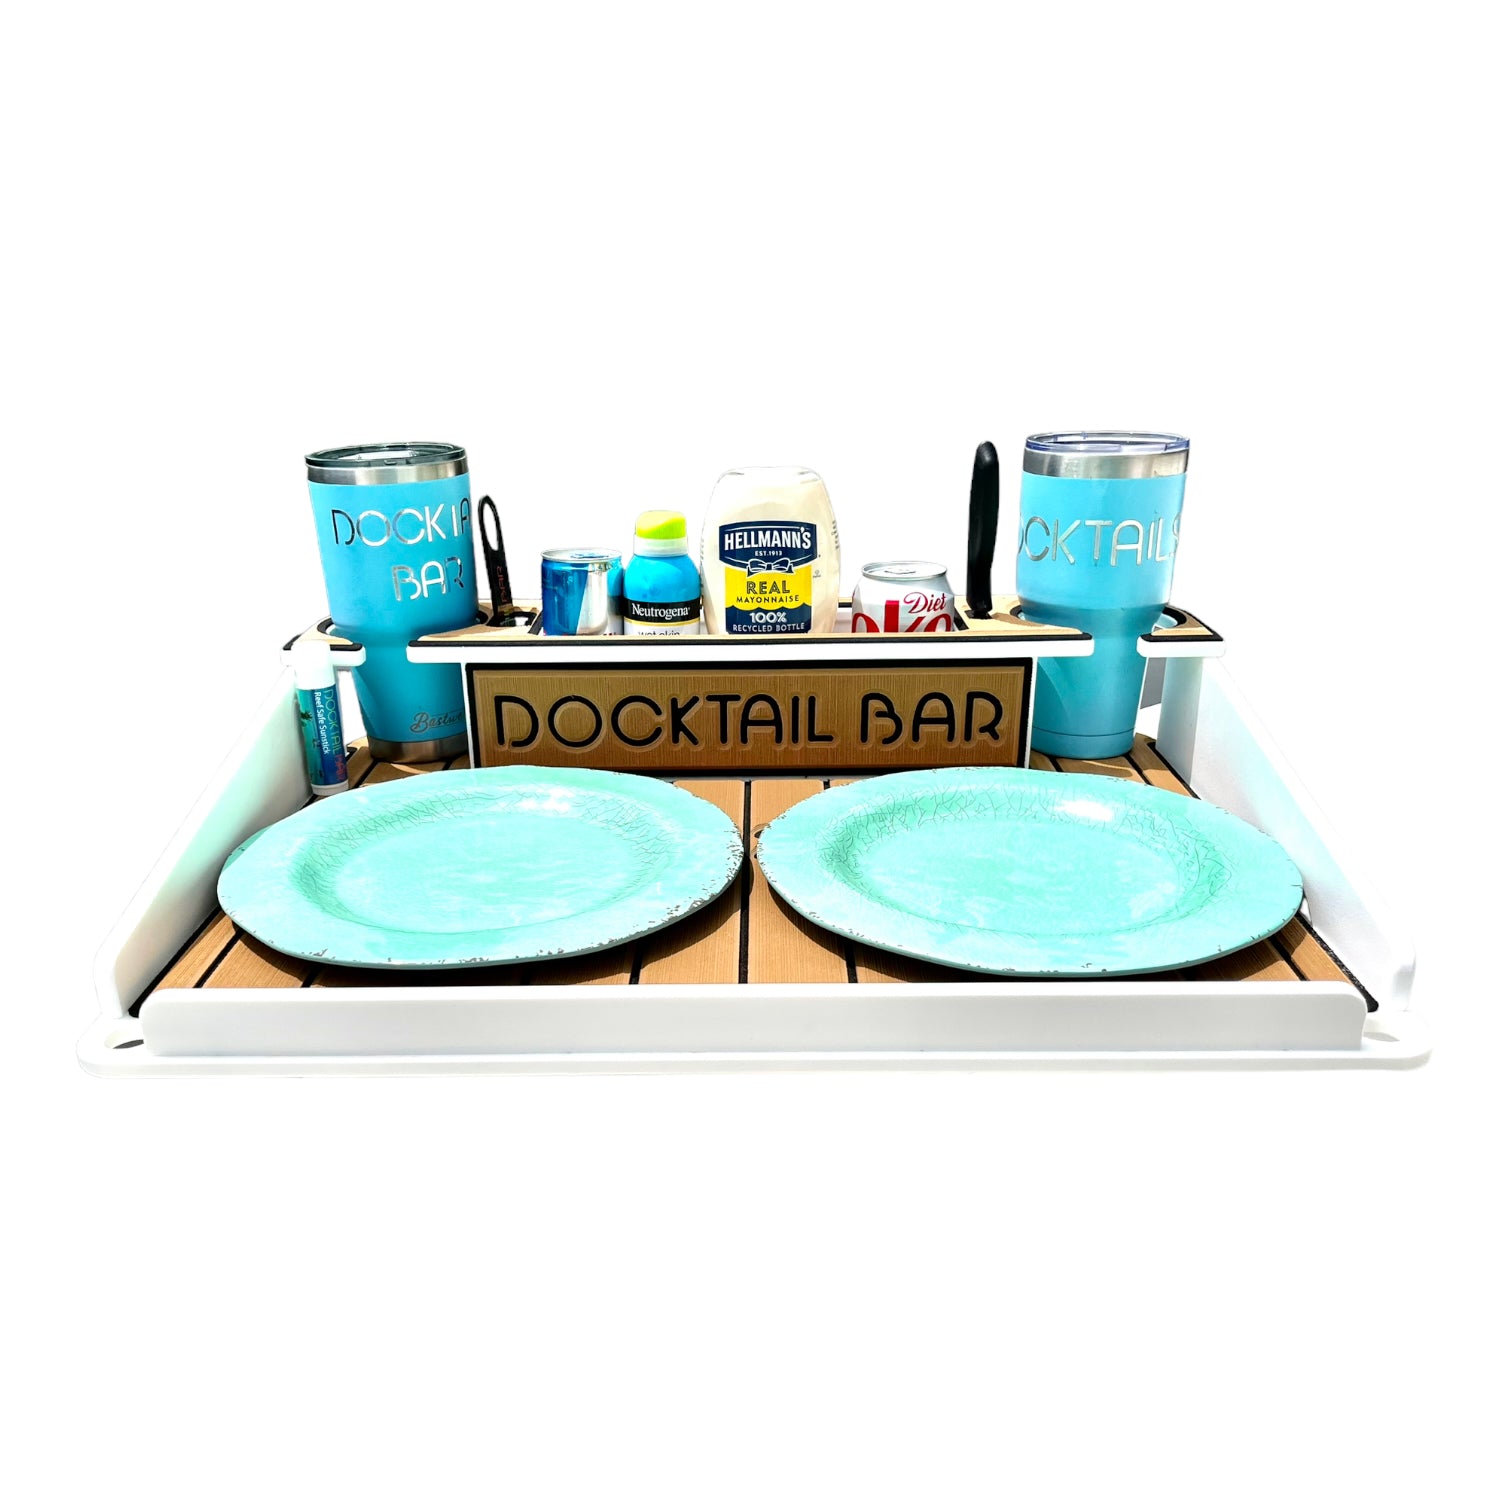 Docktail Utility Boat Table and Storage Accessory - Choose Your Mount